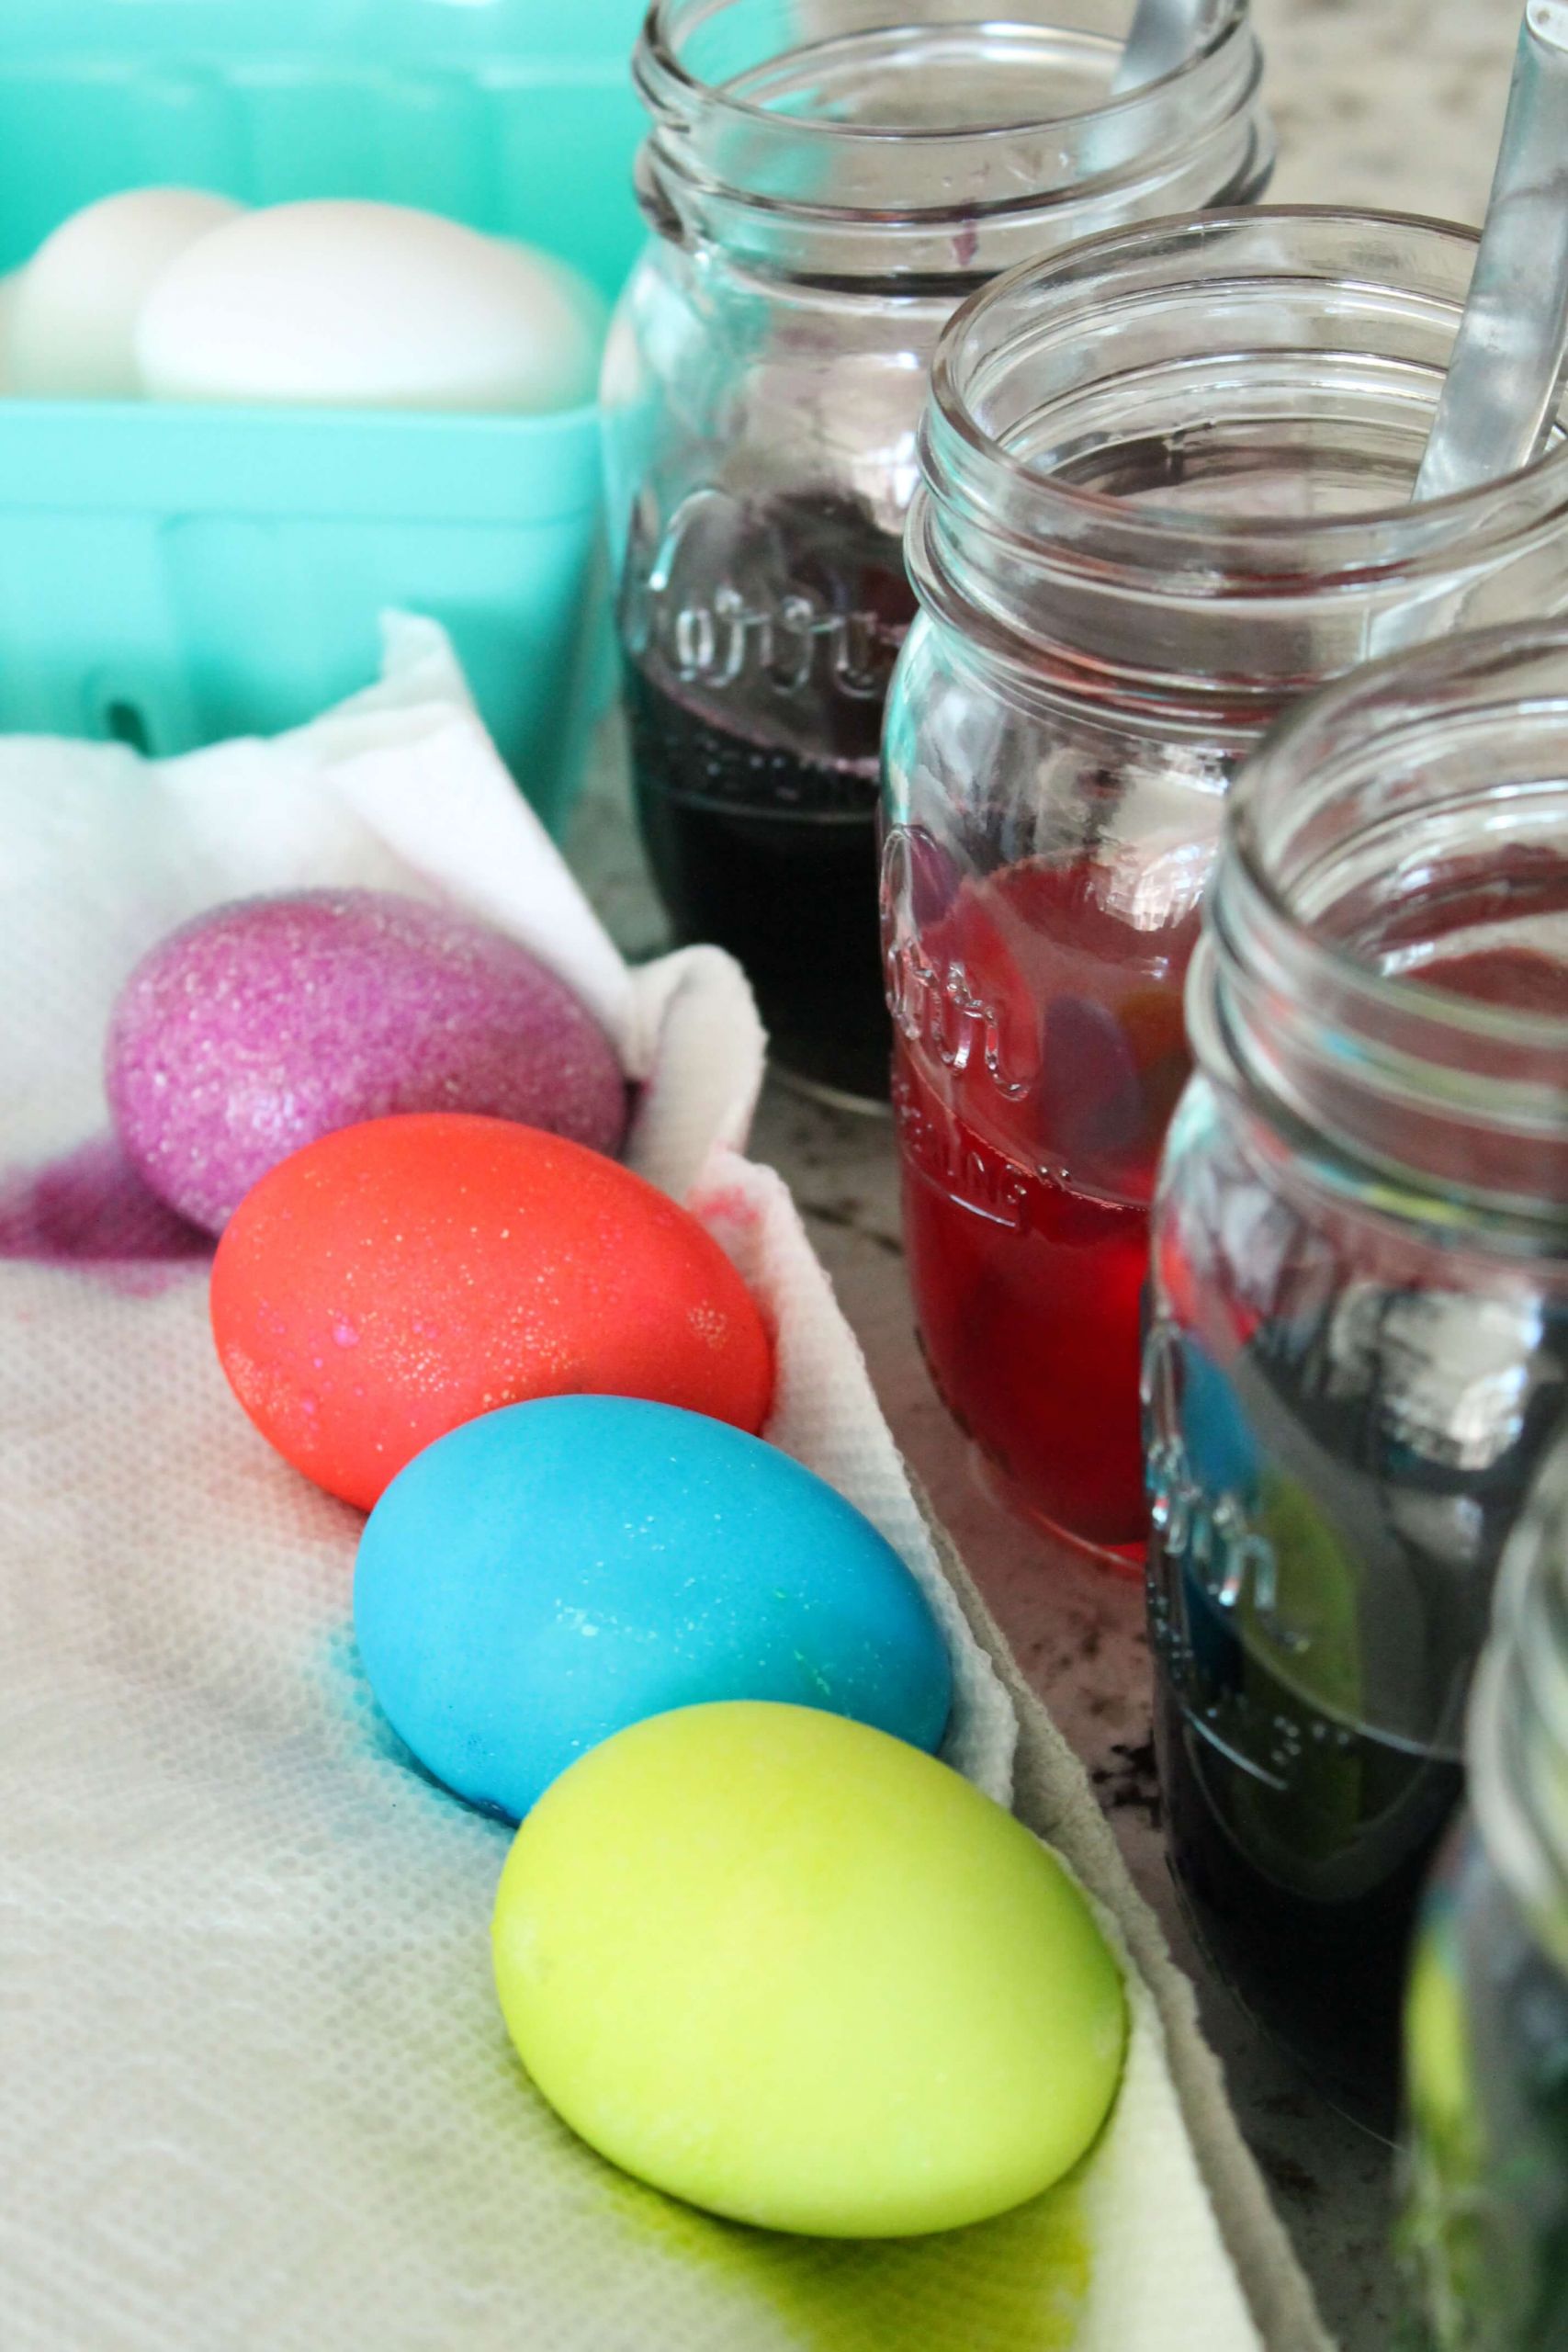 How To Make Easter Egg Dye With Food Coloring
 Homemade Easter Egg Dye Recipe